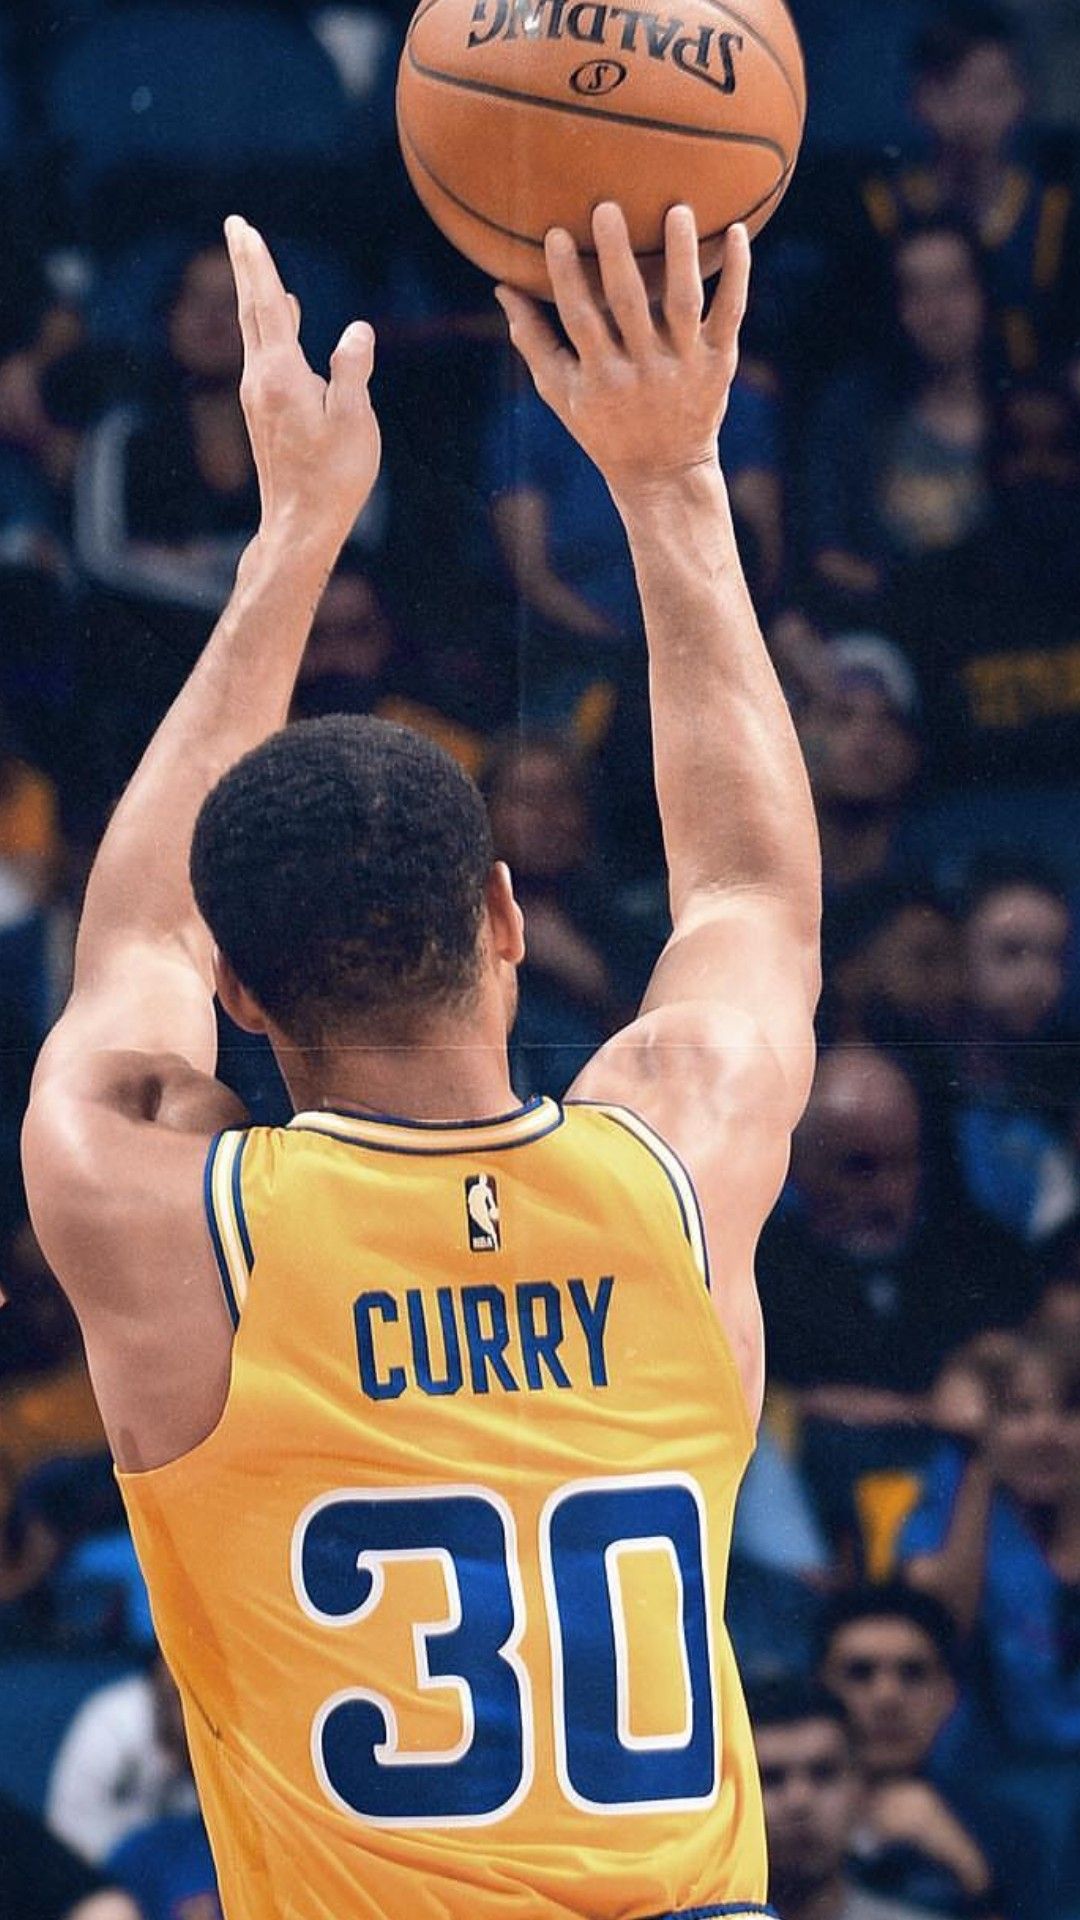 Arm and Stephen Curry Basketball Wallpapers on